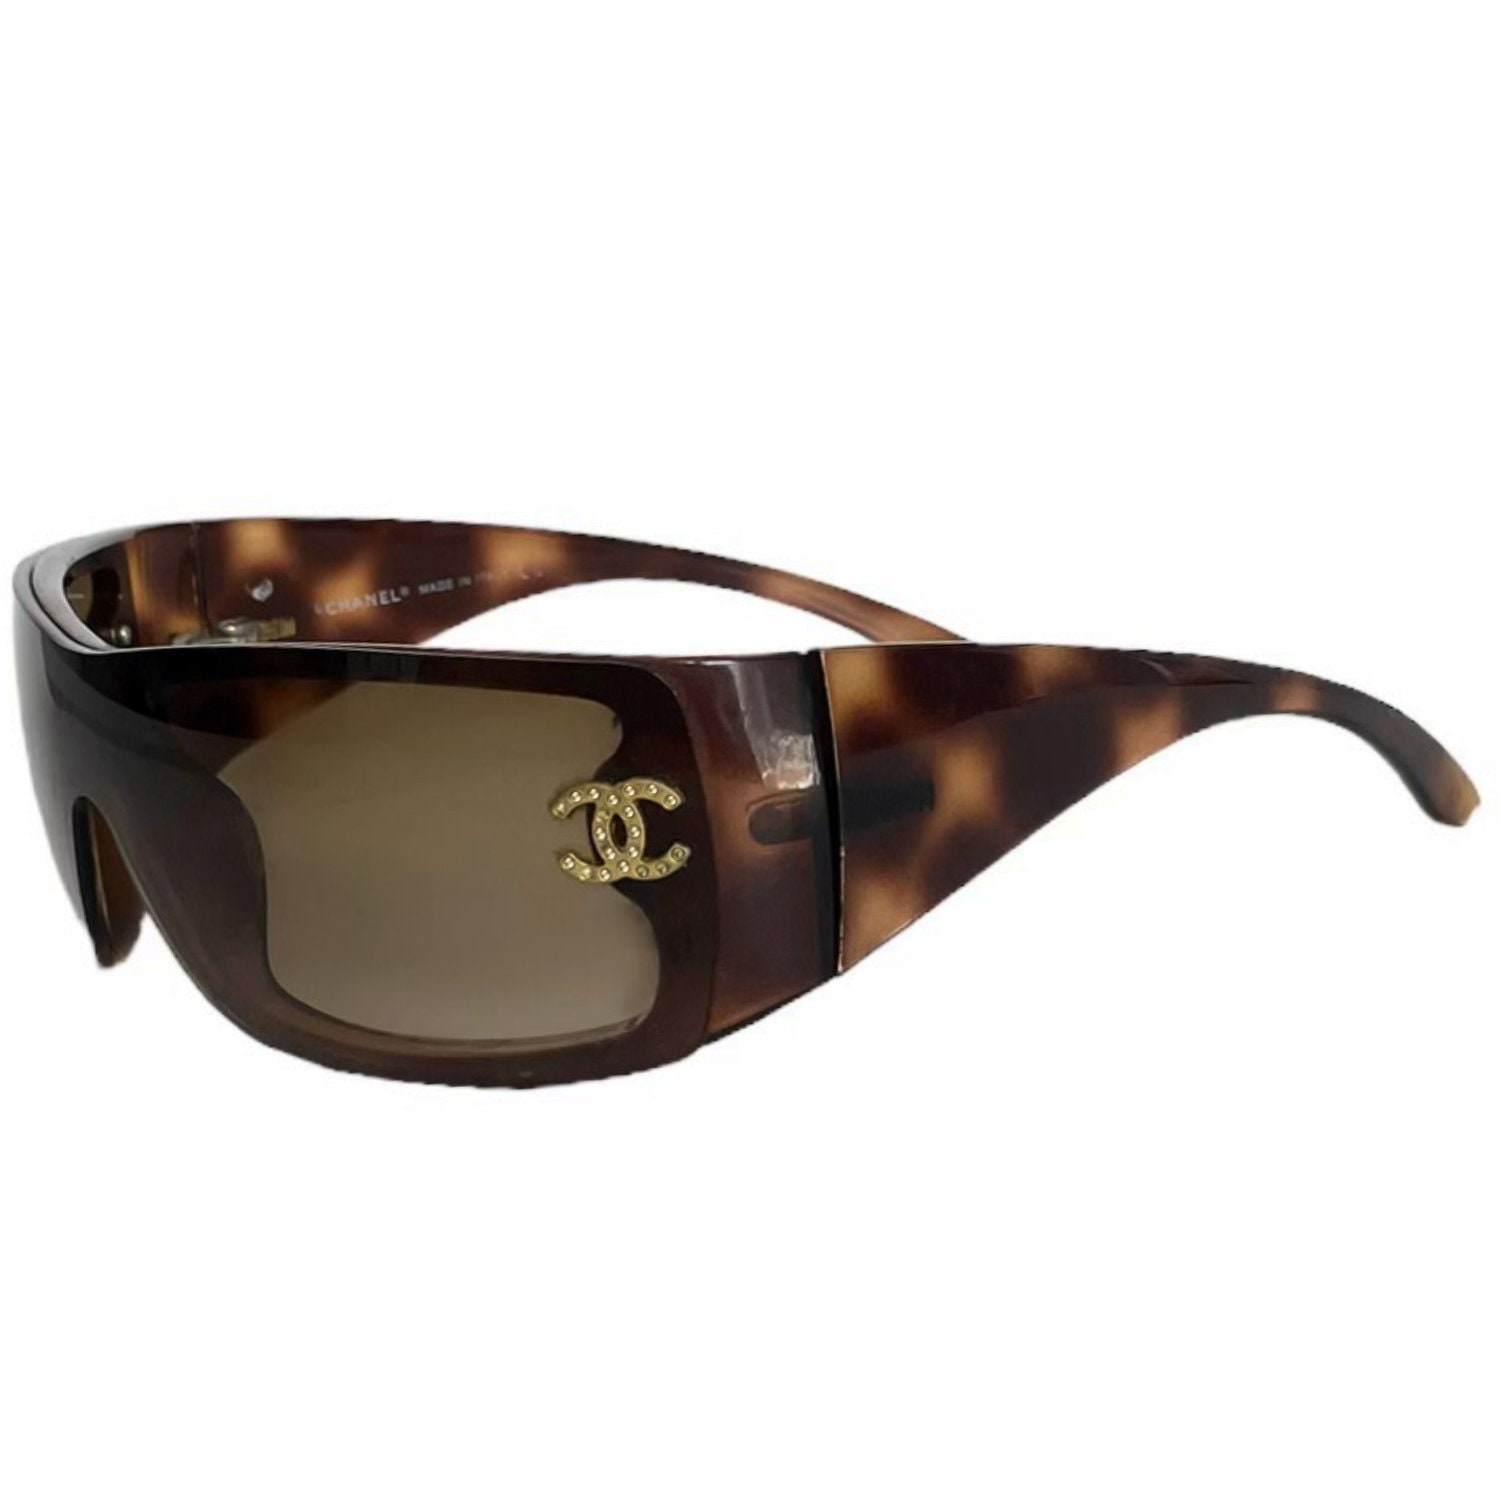 Chanel Tortoise and Gold CC Sunglasses 5072